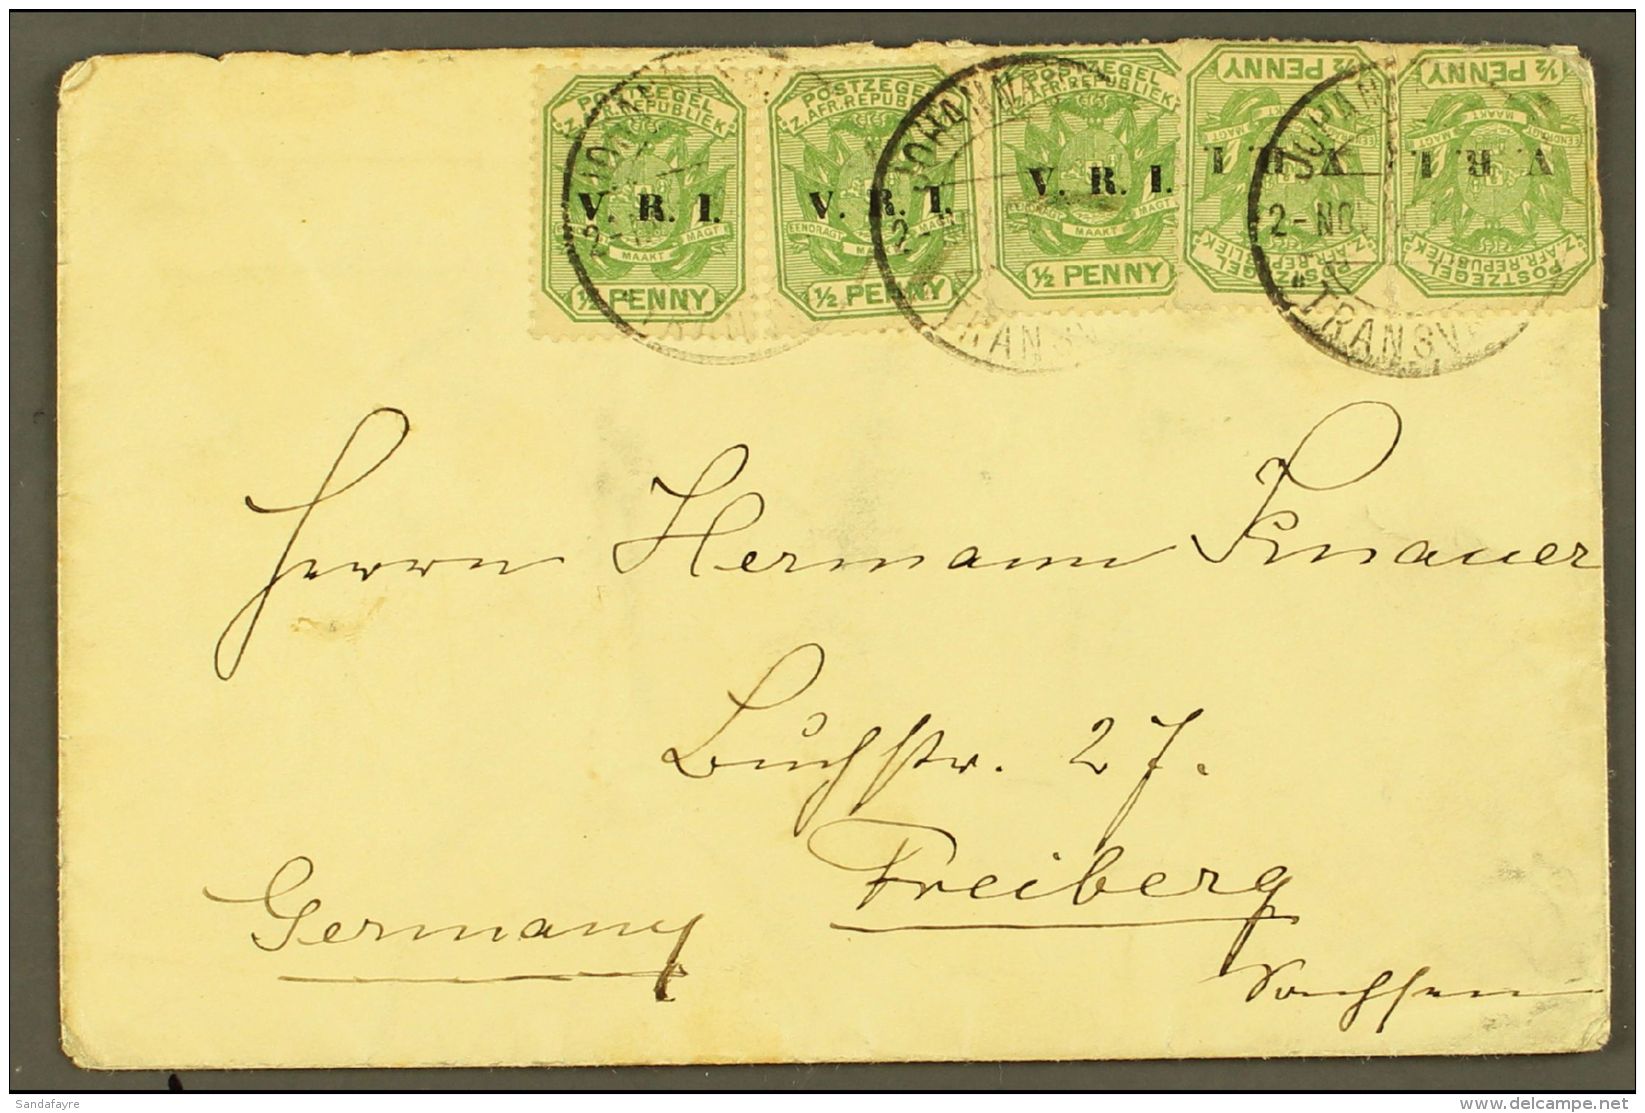 TRANSVAAL 1900 Cover To Germany With 5x &frac12;d "V.R.I." Overprint Franking, 2.11.00 Johannesburg Postmark,... - Ohne Zuordnung